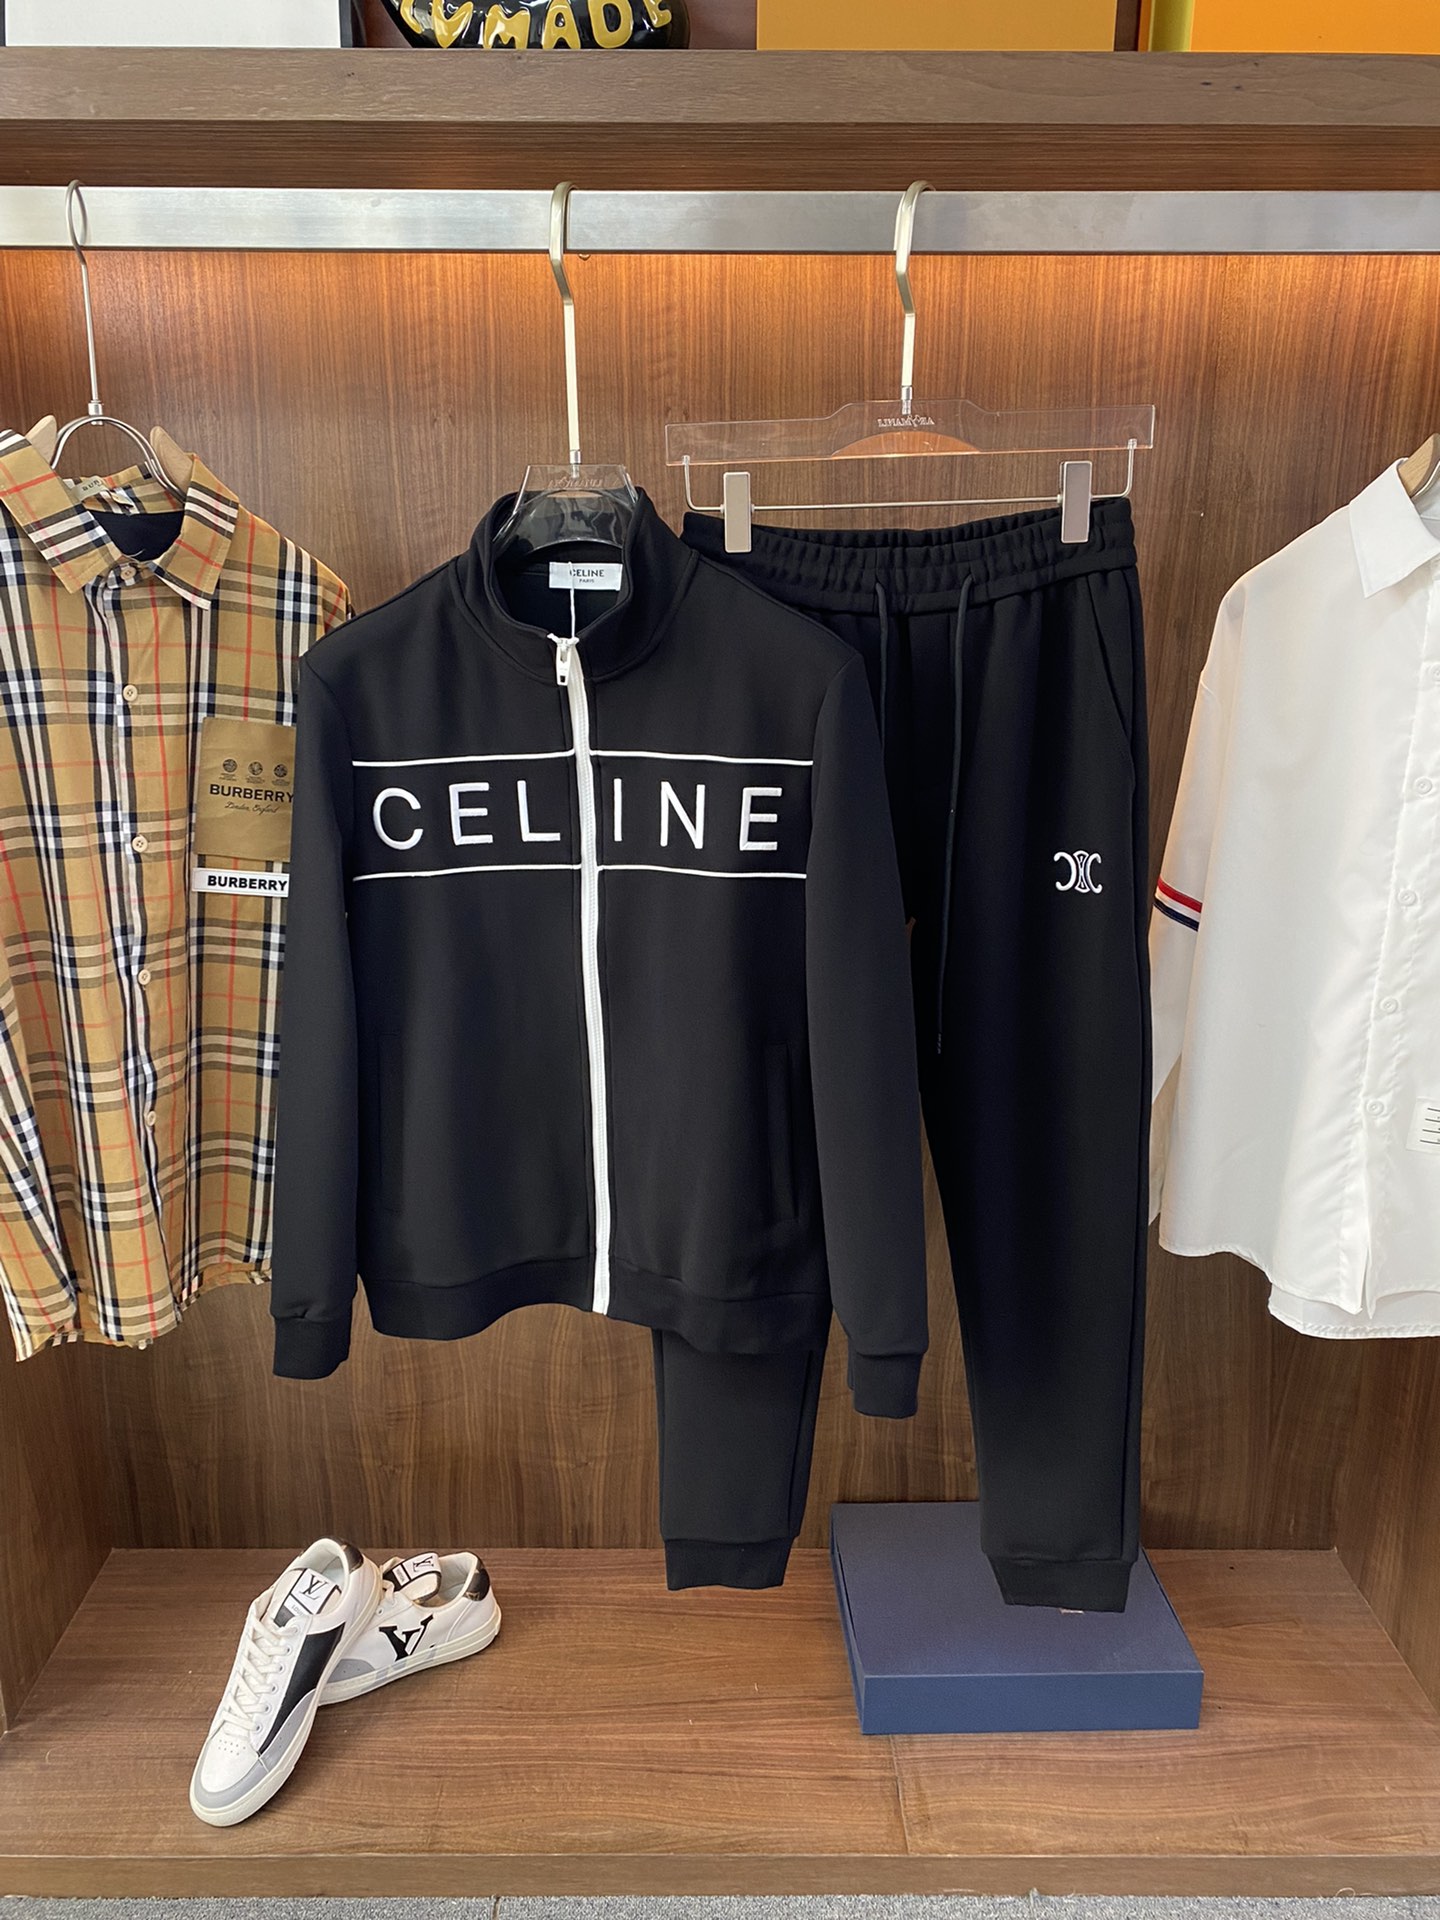 Celine Clothing Two Piece Outfits & Matching Sets Perfect Replica
 Fall/Winter Collection Fashion Casual